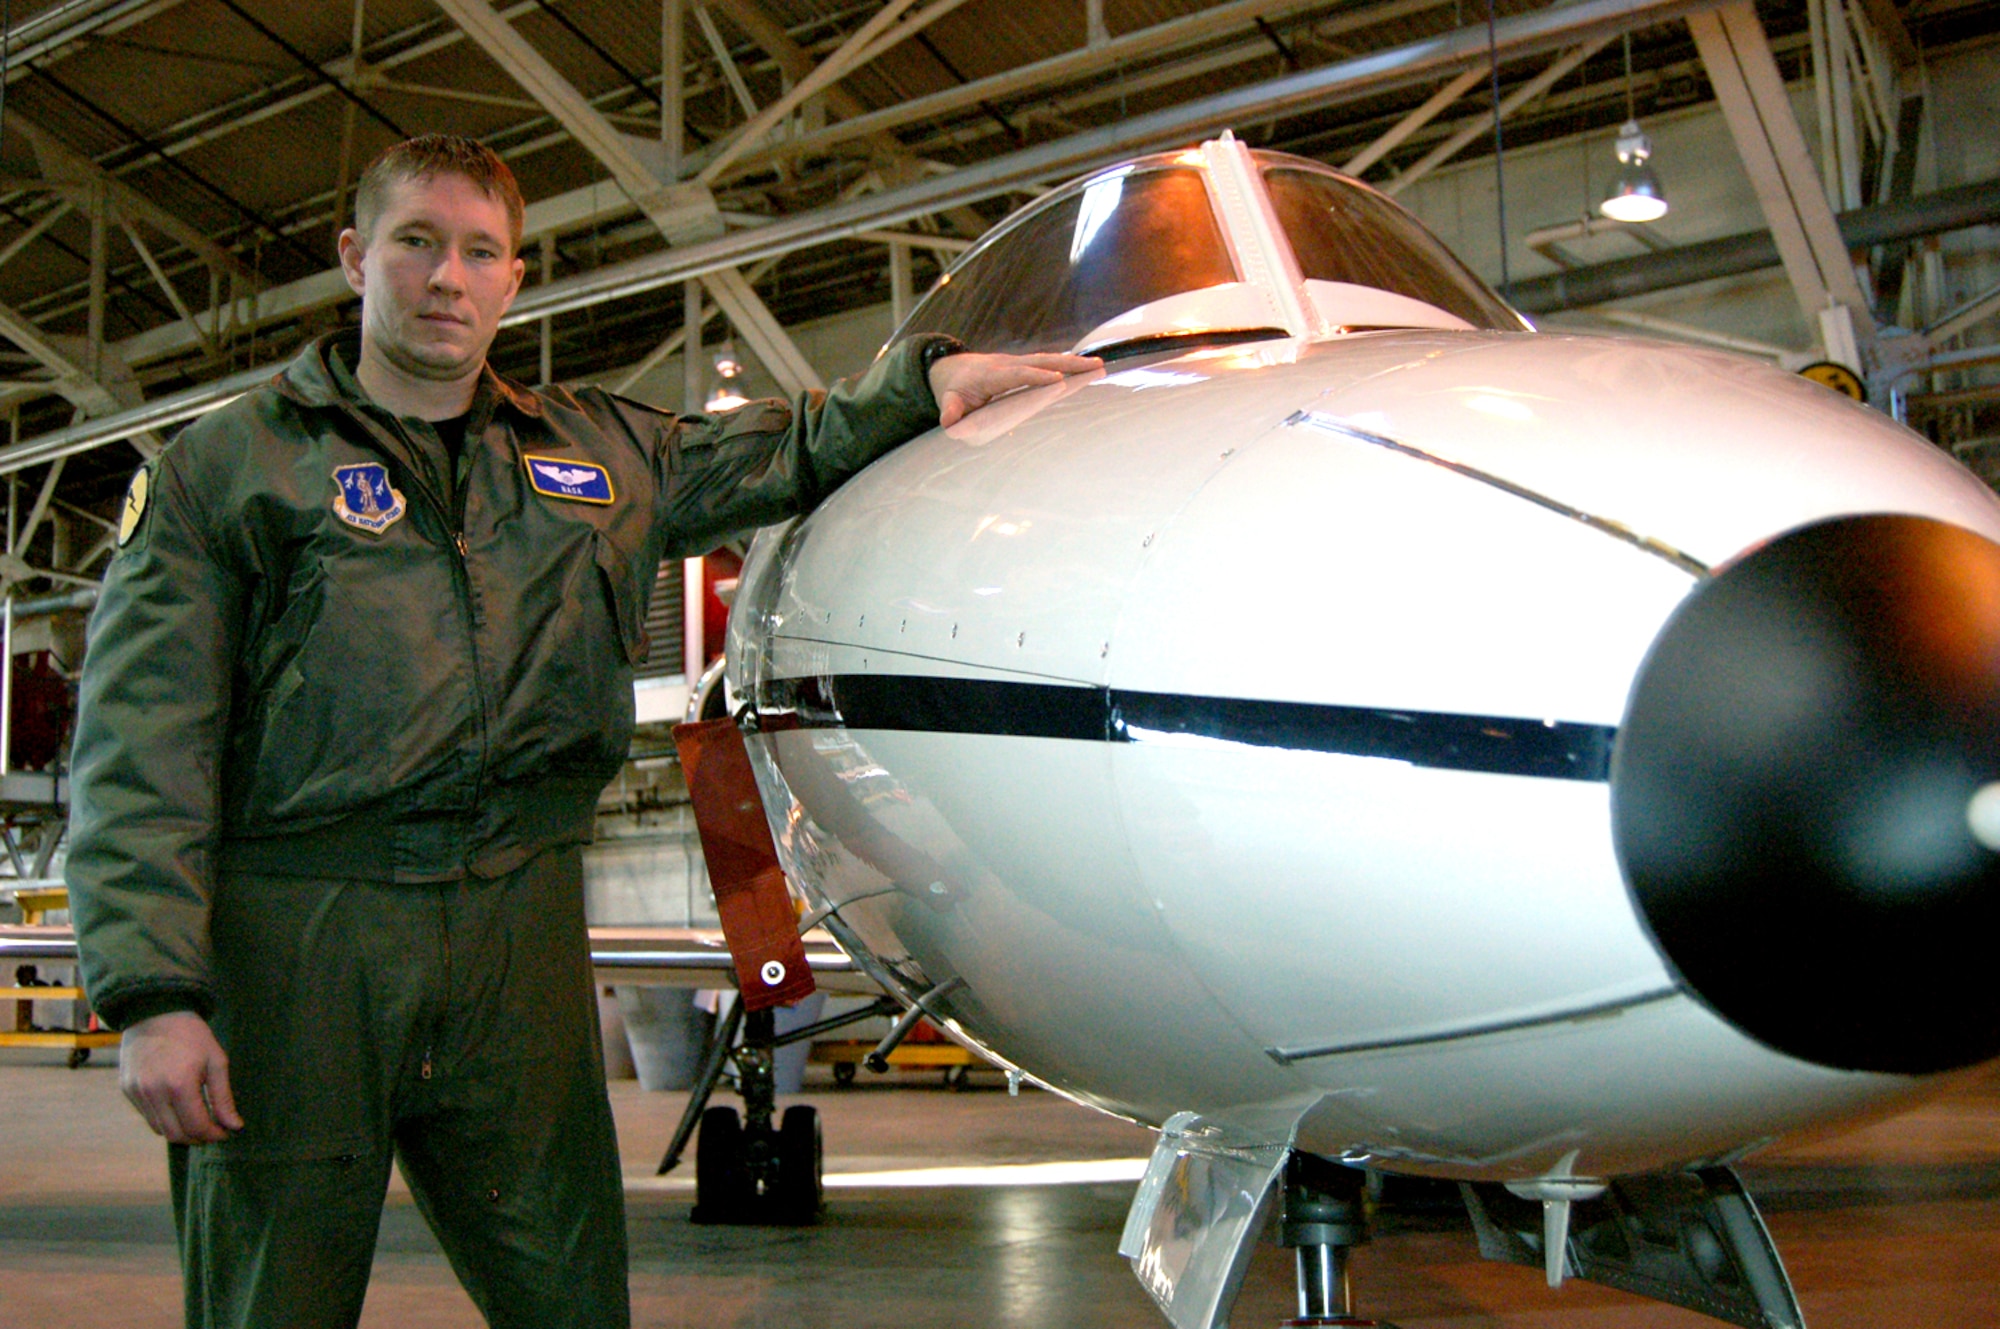 Capt. Chris “NASA” Thiesing, standardization and evaluation liaison and C-21 pilot for the 118th Airlift Squadron, stands next to a C-21 in the main hangar at Bradley Air National Guard Base, East Granby, Conn. Thiesing originally joined the Conn. Air National Guard as an enlisted Airman working in intelligence and became a pilot after achieving a bachelor’s degree. Thiesing said he wants guardsmen to know that being a traditional guardsman affords you the opportunity to get an interview to become a pilot if you meet the eligibility requirements. (U.S. Air Force photo by Tech. Sgt. Joshua Mead)